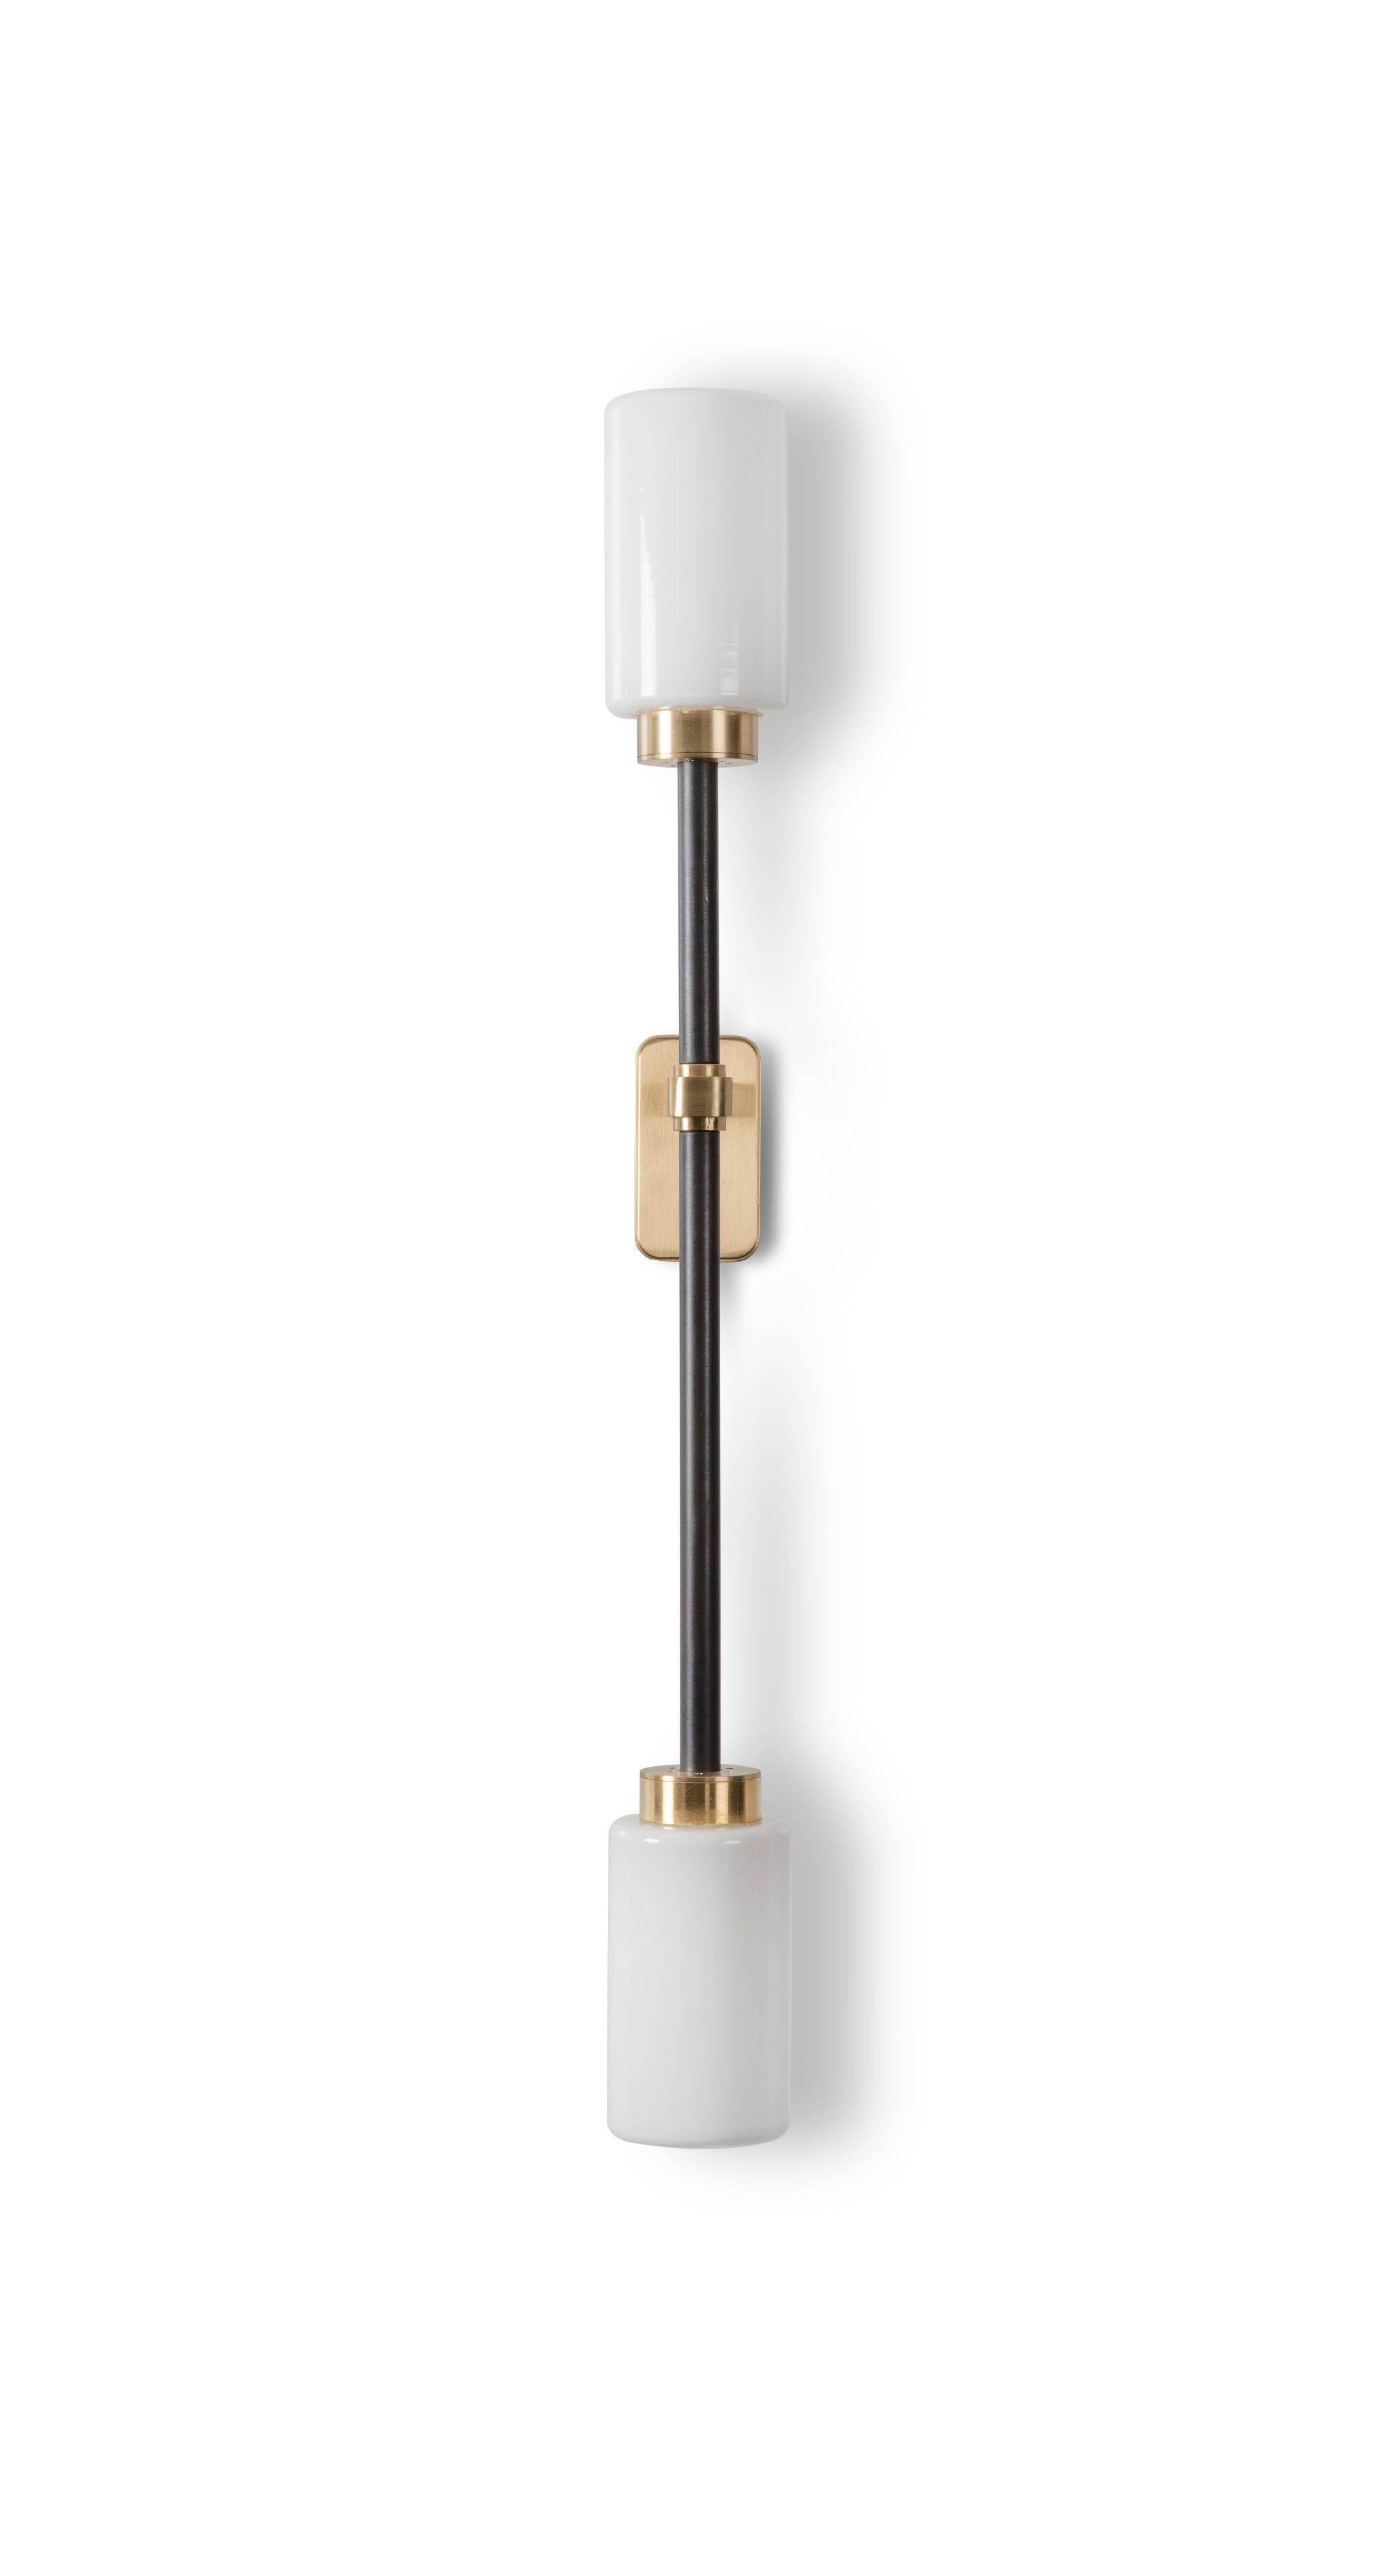 Opal Farol single wall light by Bert Frank
Dimensions: H 66 x W 10.5 x D 7 cm
Materials: Brass, bronze and opal

Available finishes: Bronzed brass, black brass
All our lamps can be wired according to each country. If sold to the USA it will be wired